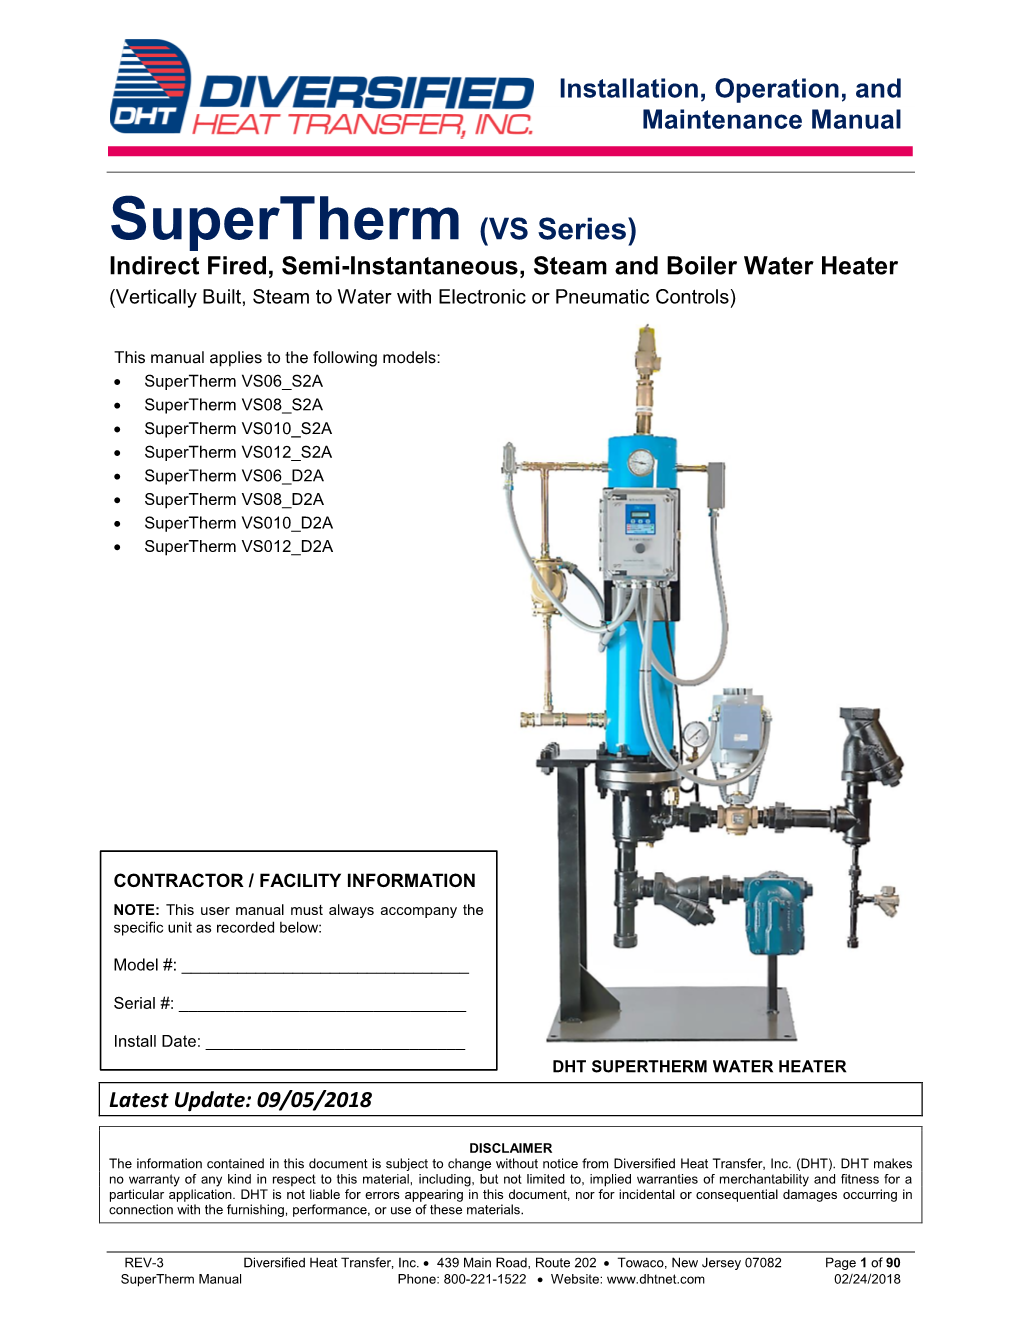 Supertherm (VS Series) Indirect Fired, Semi-Instantaneous, Steam and Boiler Water Heater (Vertically Built, Steam to Water with Electronic Or Pneumatic Controls)